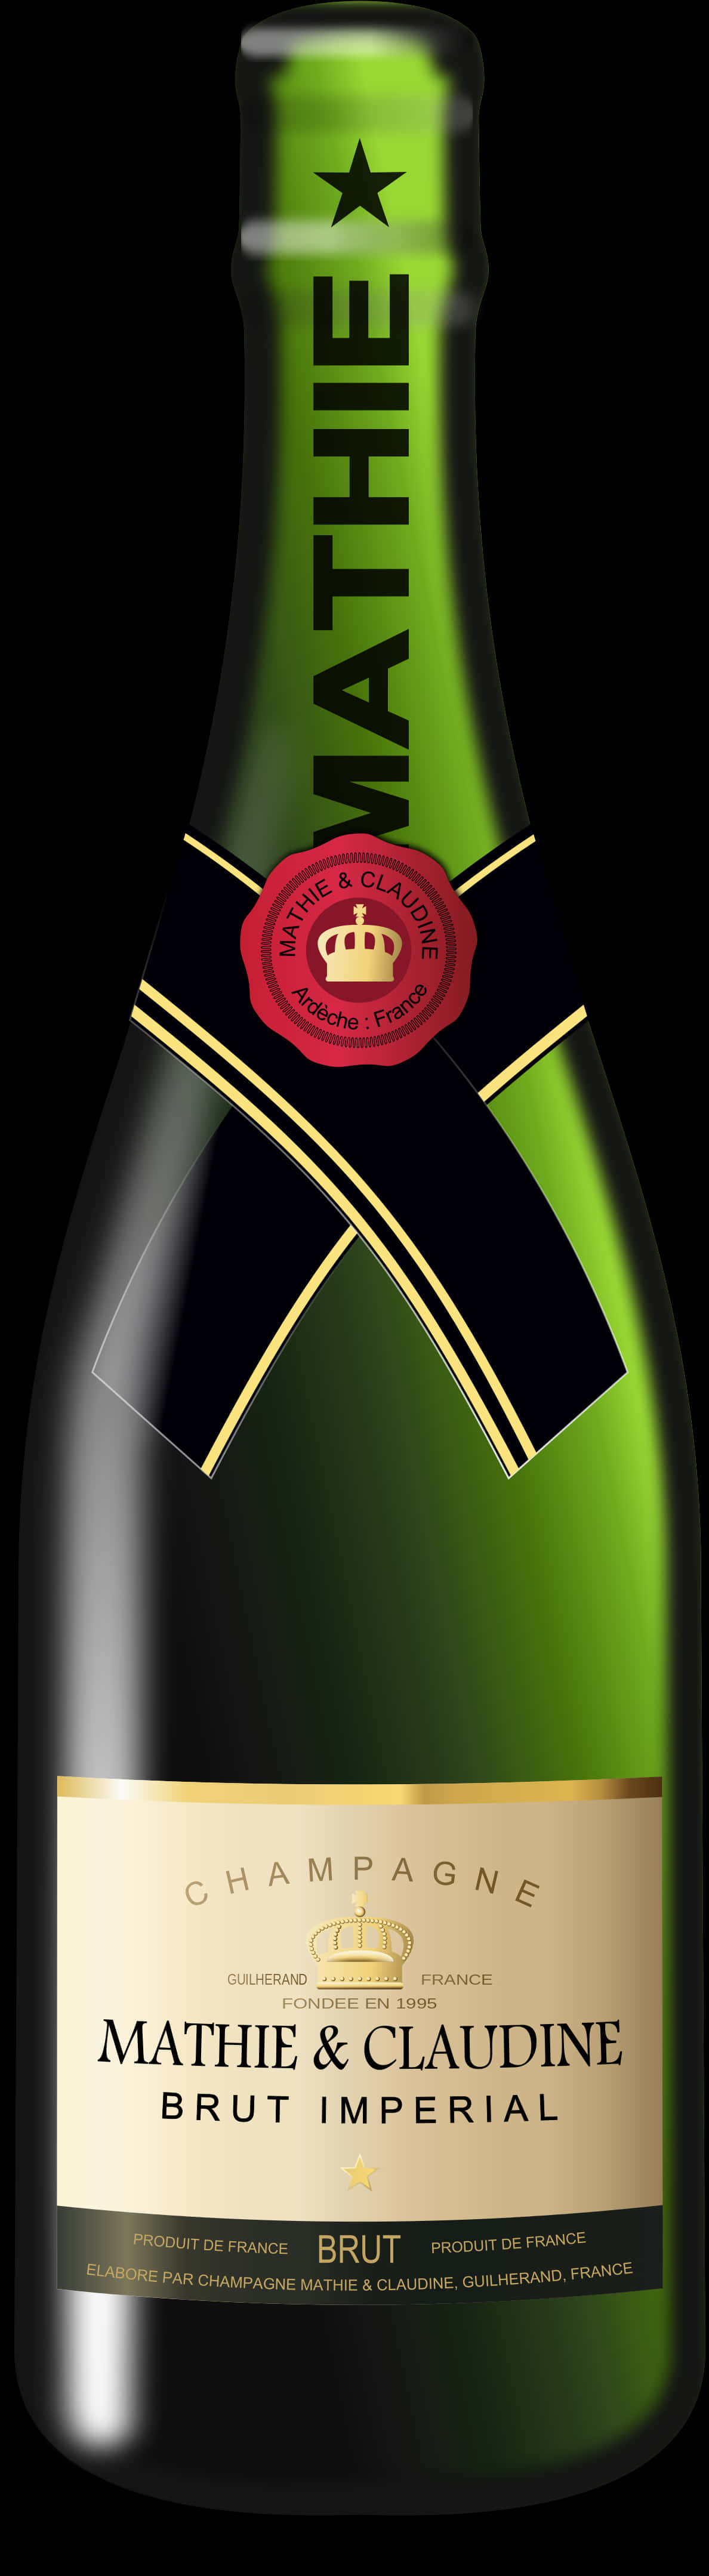 Mathie Claudine Brut Imperial Champagne Bottle PNG